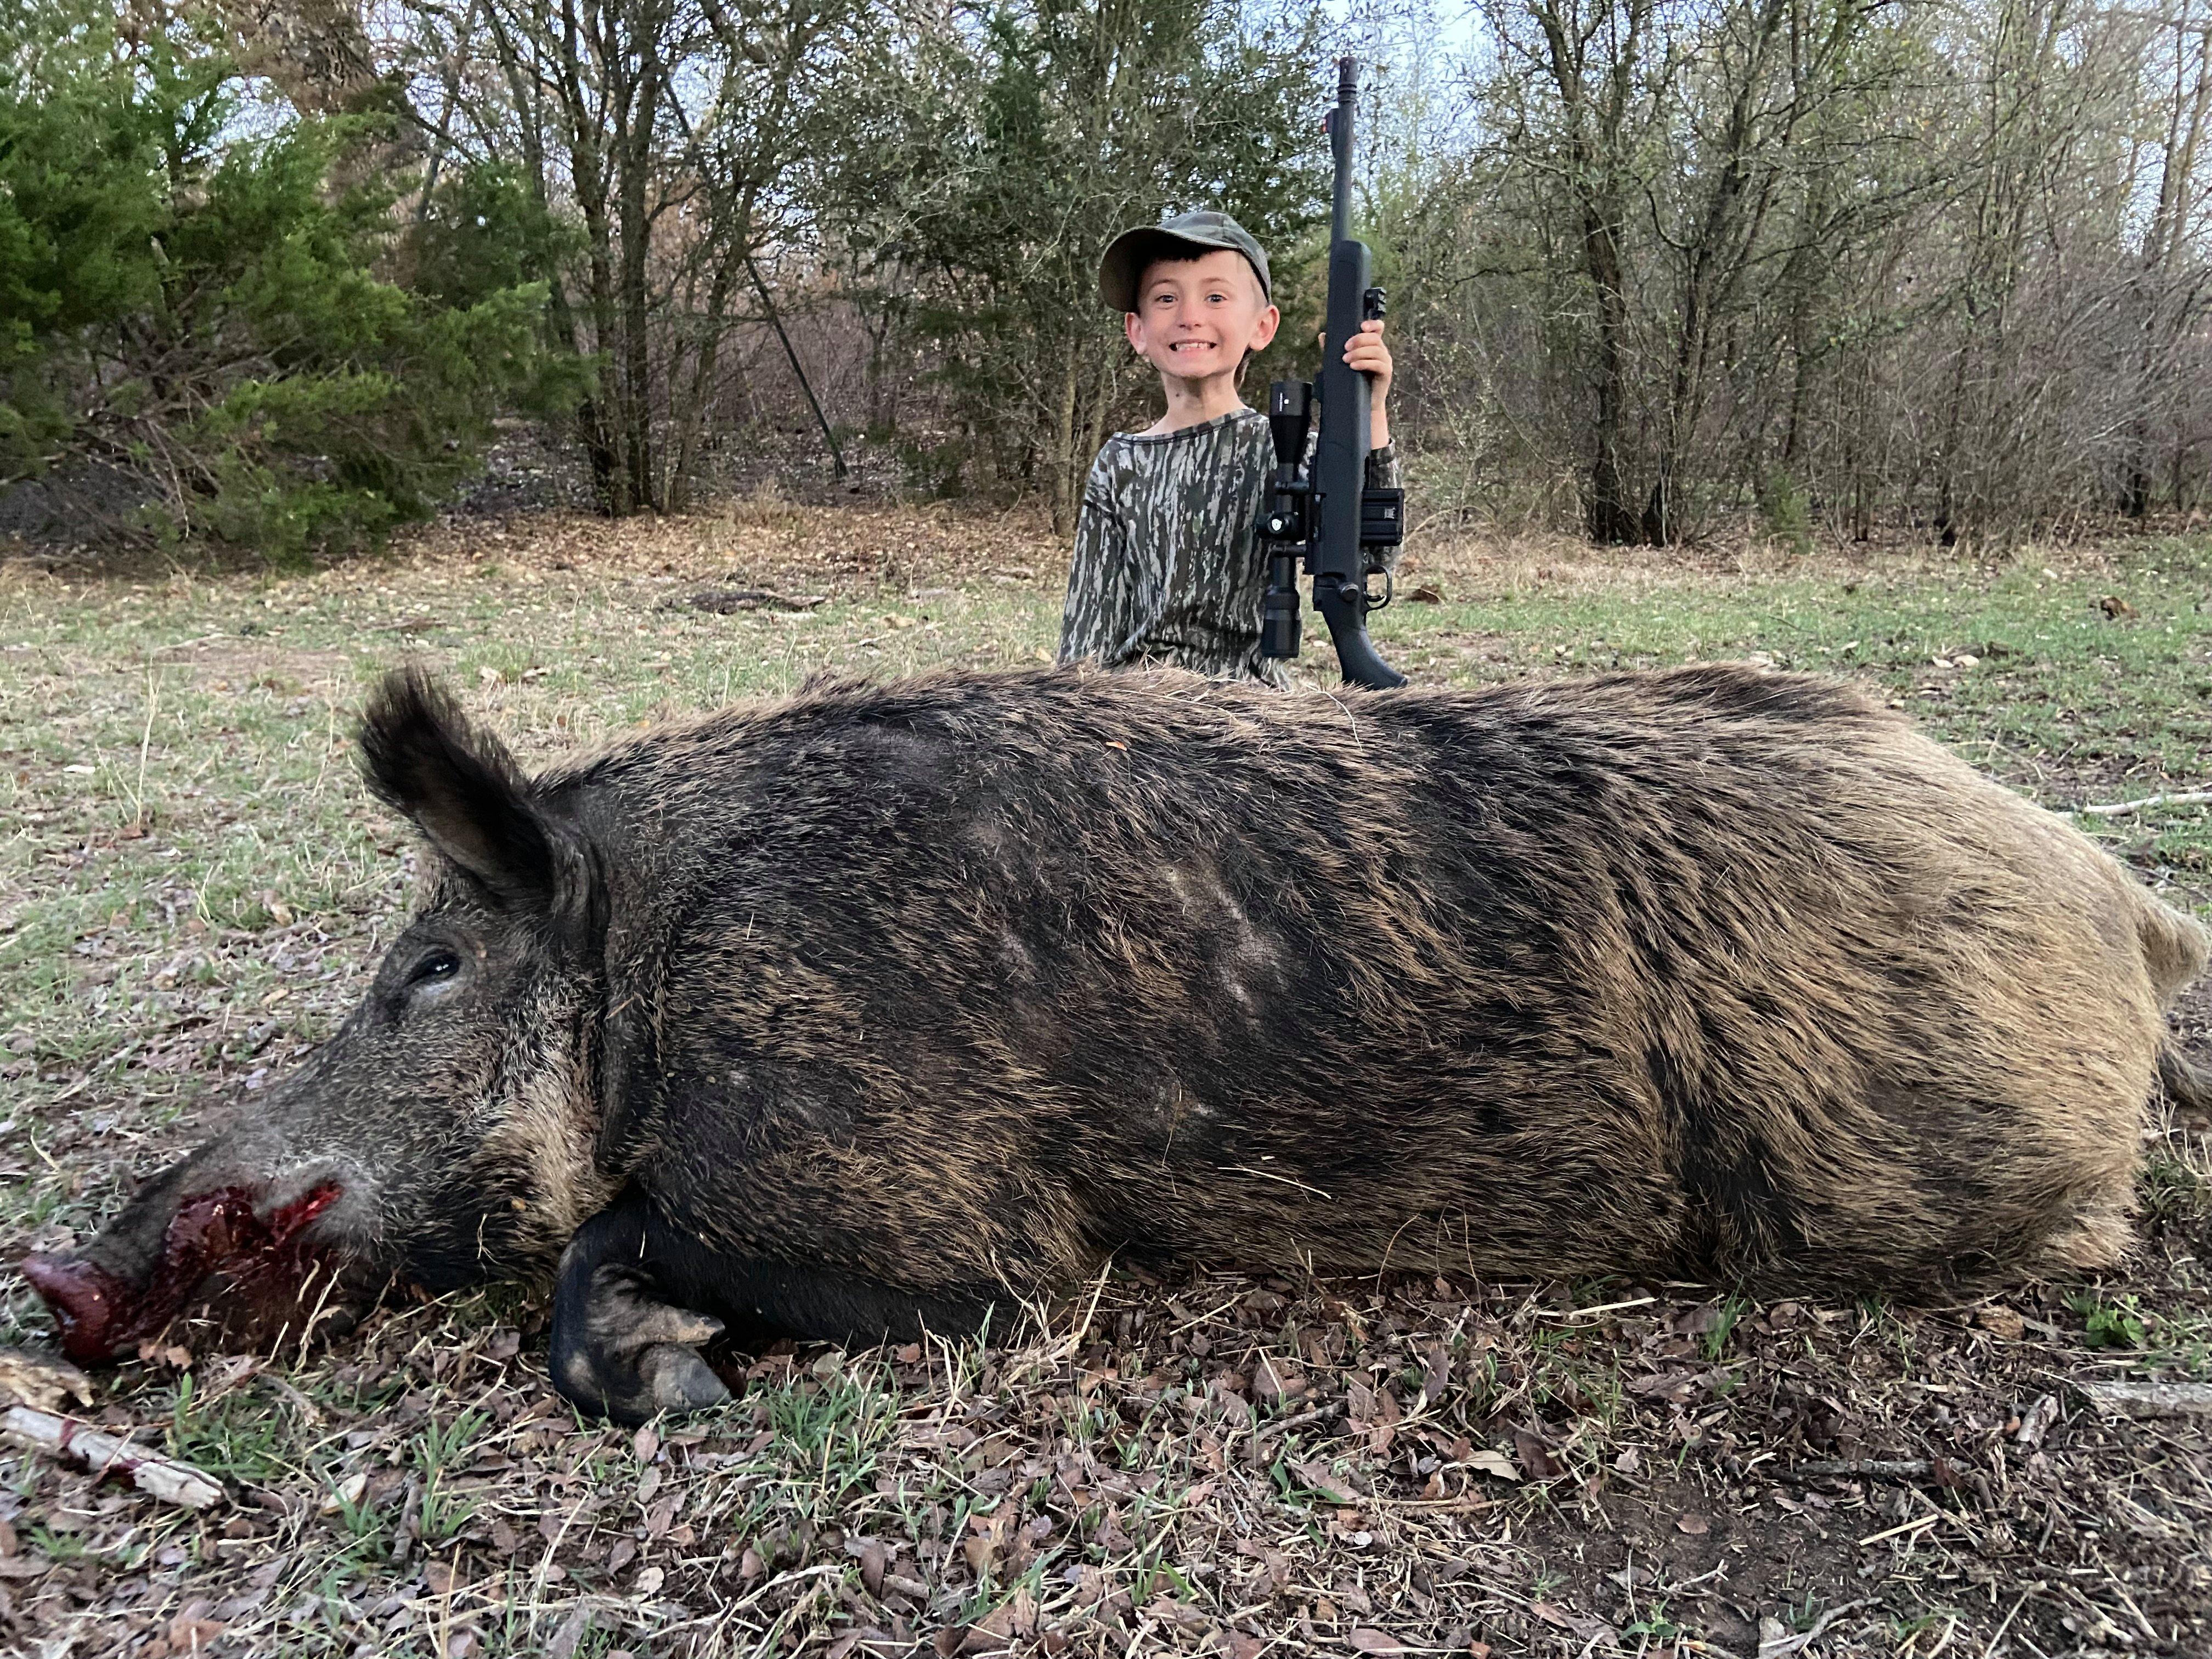 Anse Brantley poses with a huge hog. Image by Will Brantley